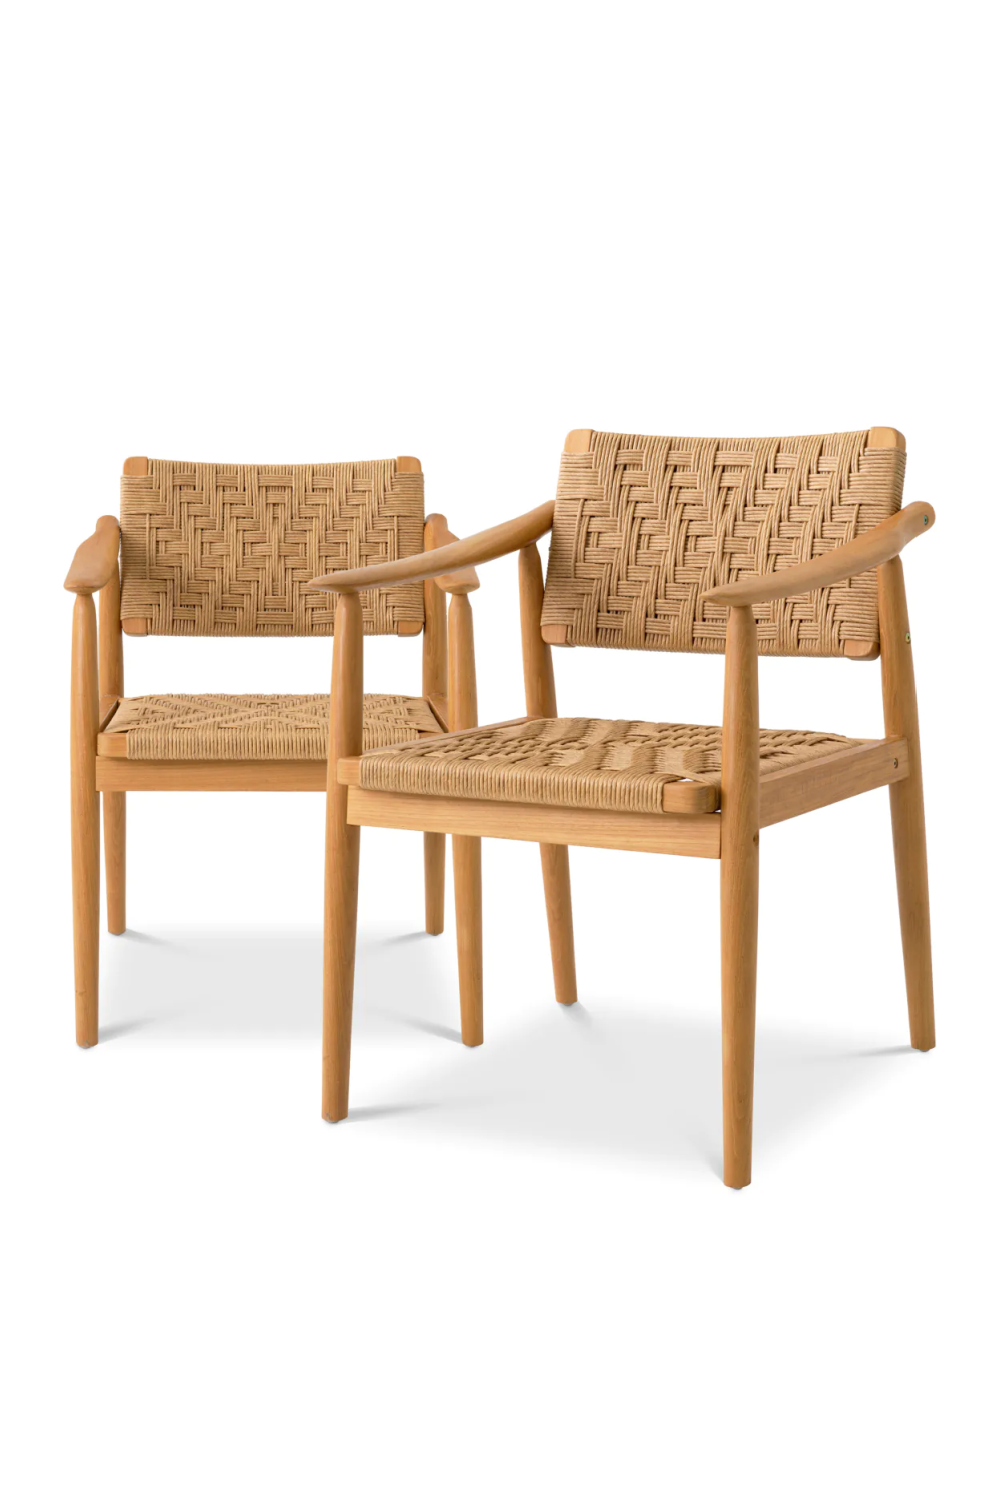 Natural Teak Outdoor Dining Chairs (2) | Eichholtz Coral Bay | Oroa.com